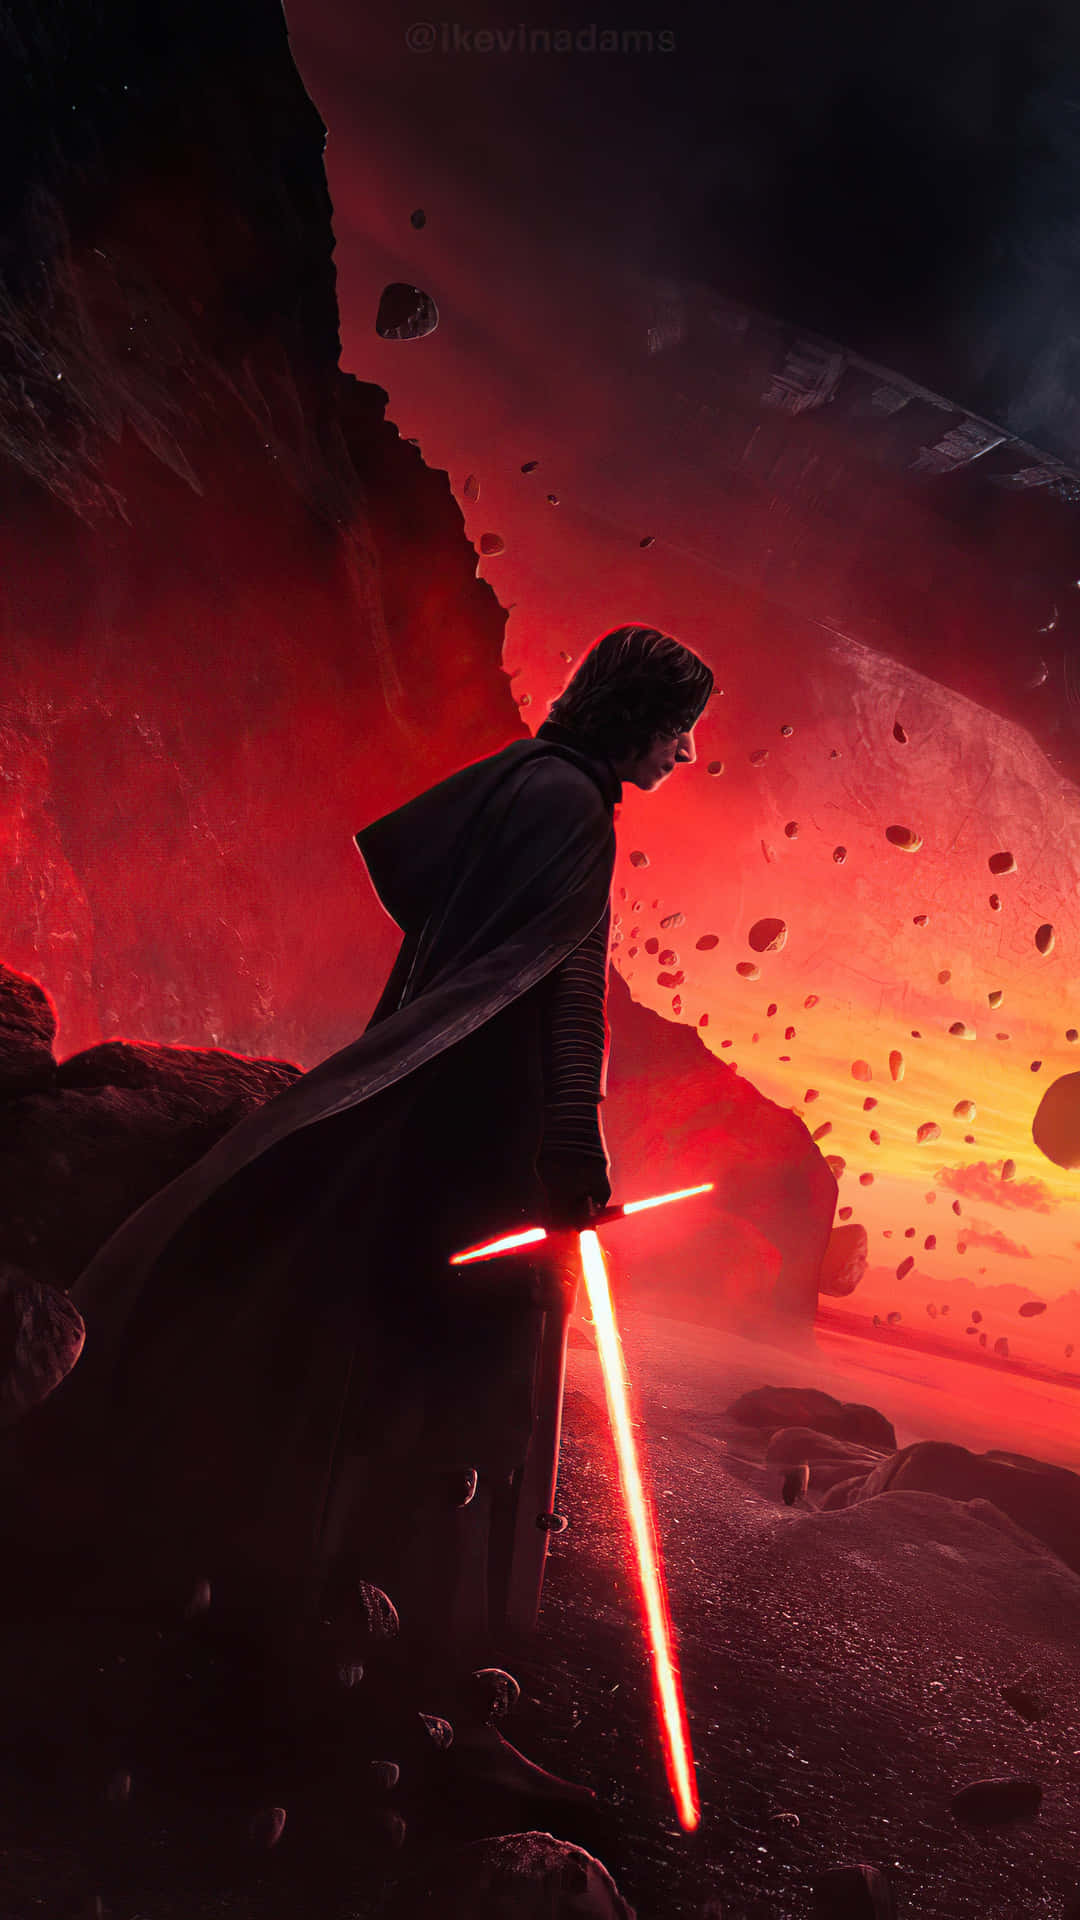 With the power of the Dark Side, Kylo Ren reigns supreme Wallpaper